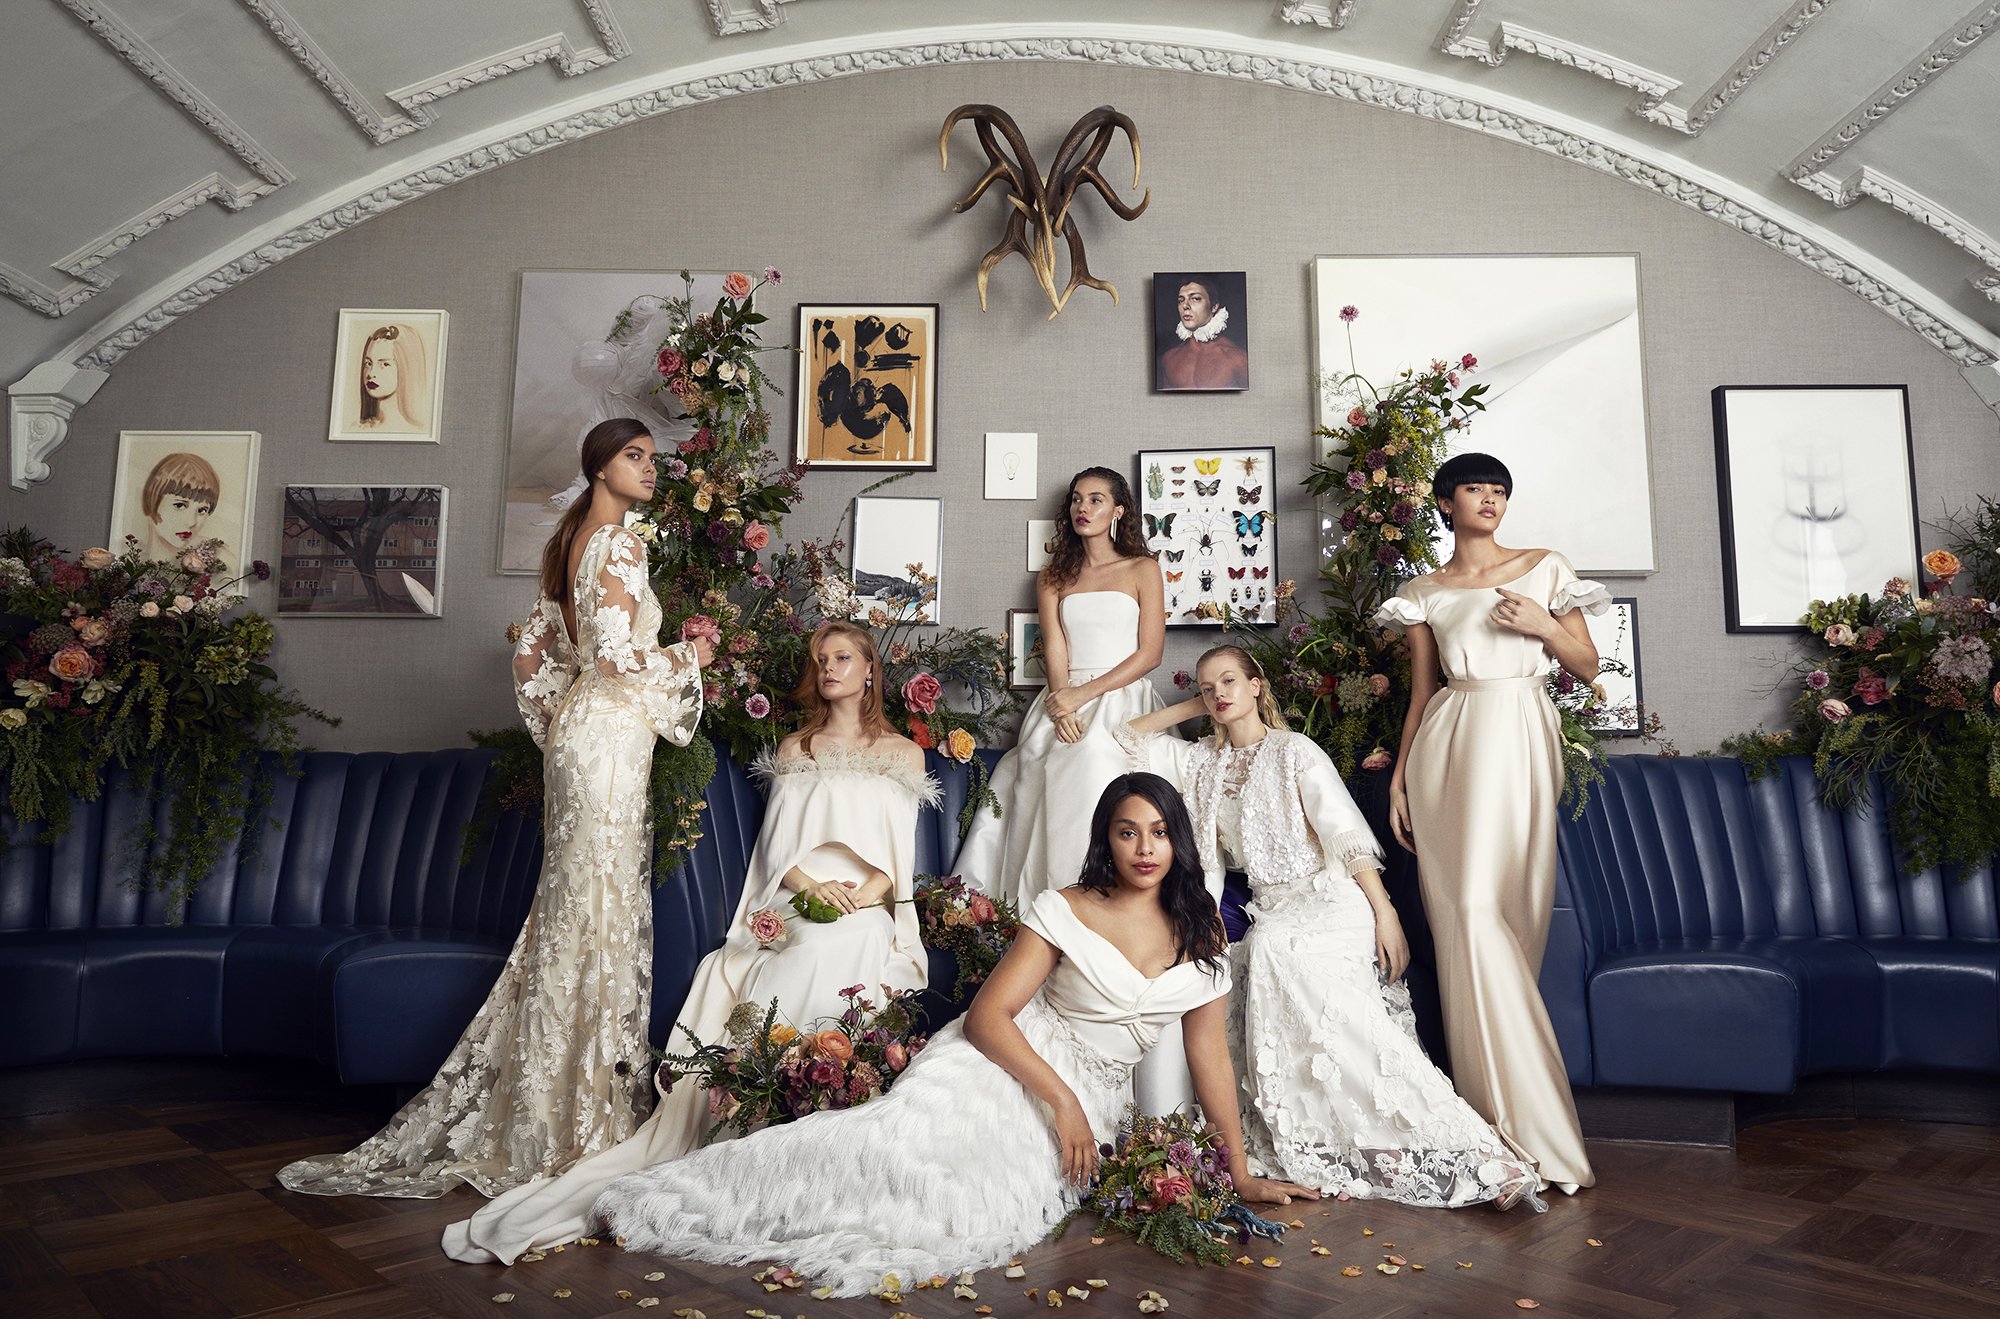 An inspiration shoot at the Groucho Club with Halfpenny London wedding dresses